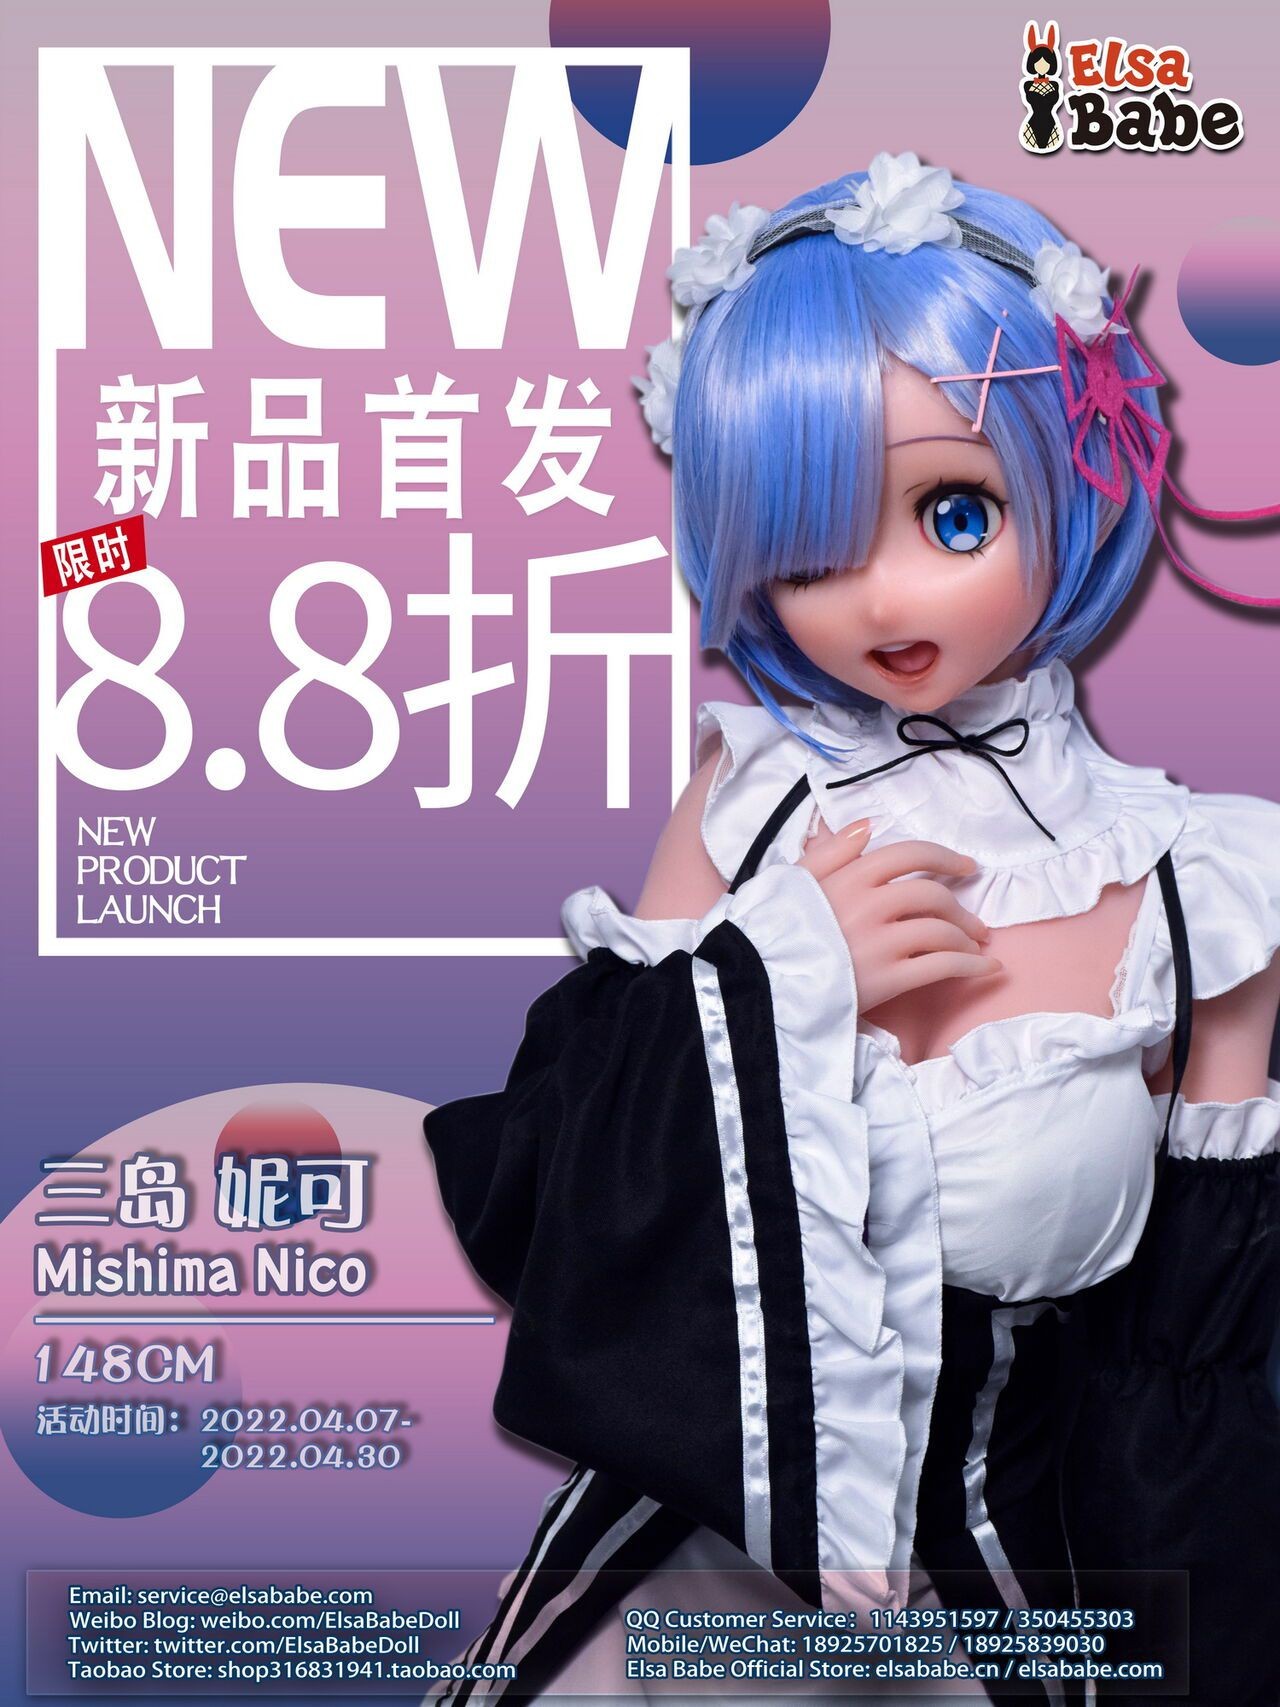 Blackcock Elsa Babe [148CM AHR005 Mishima Nico] 12% Off The First Launch Of New Doll! 2022.04.07 Family